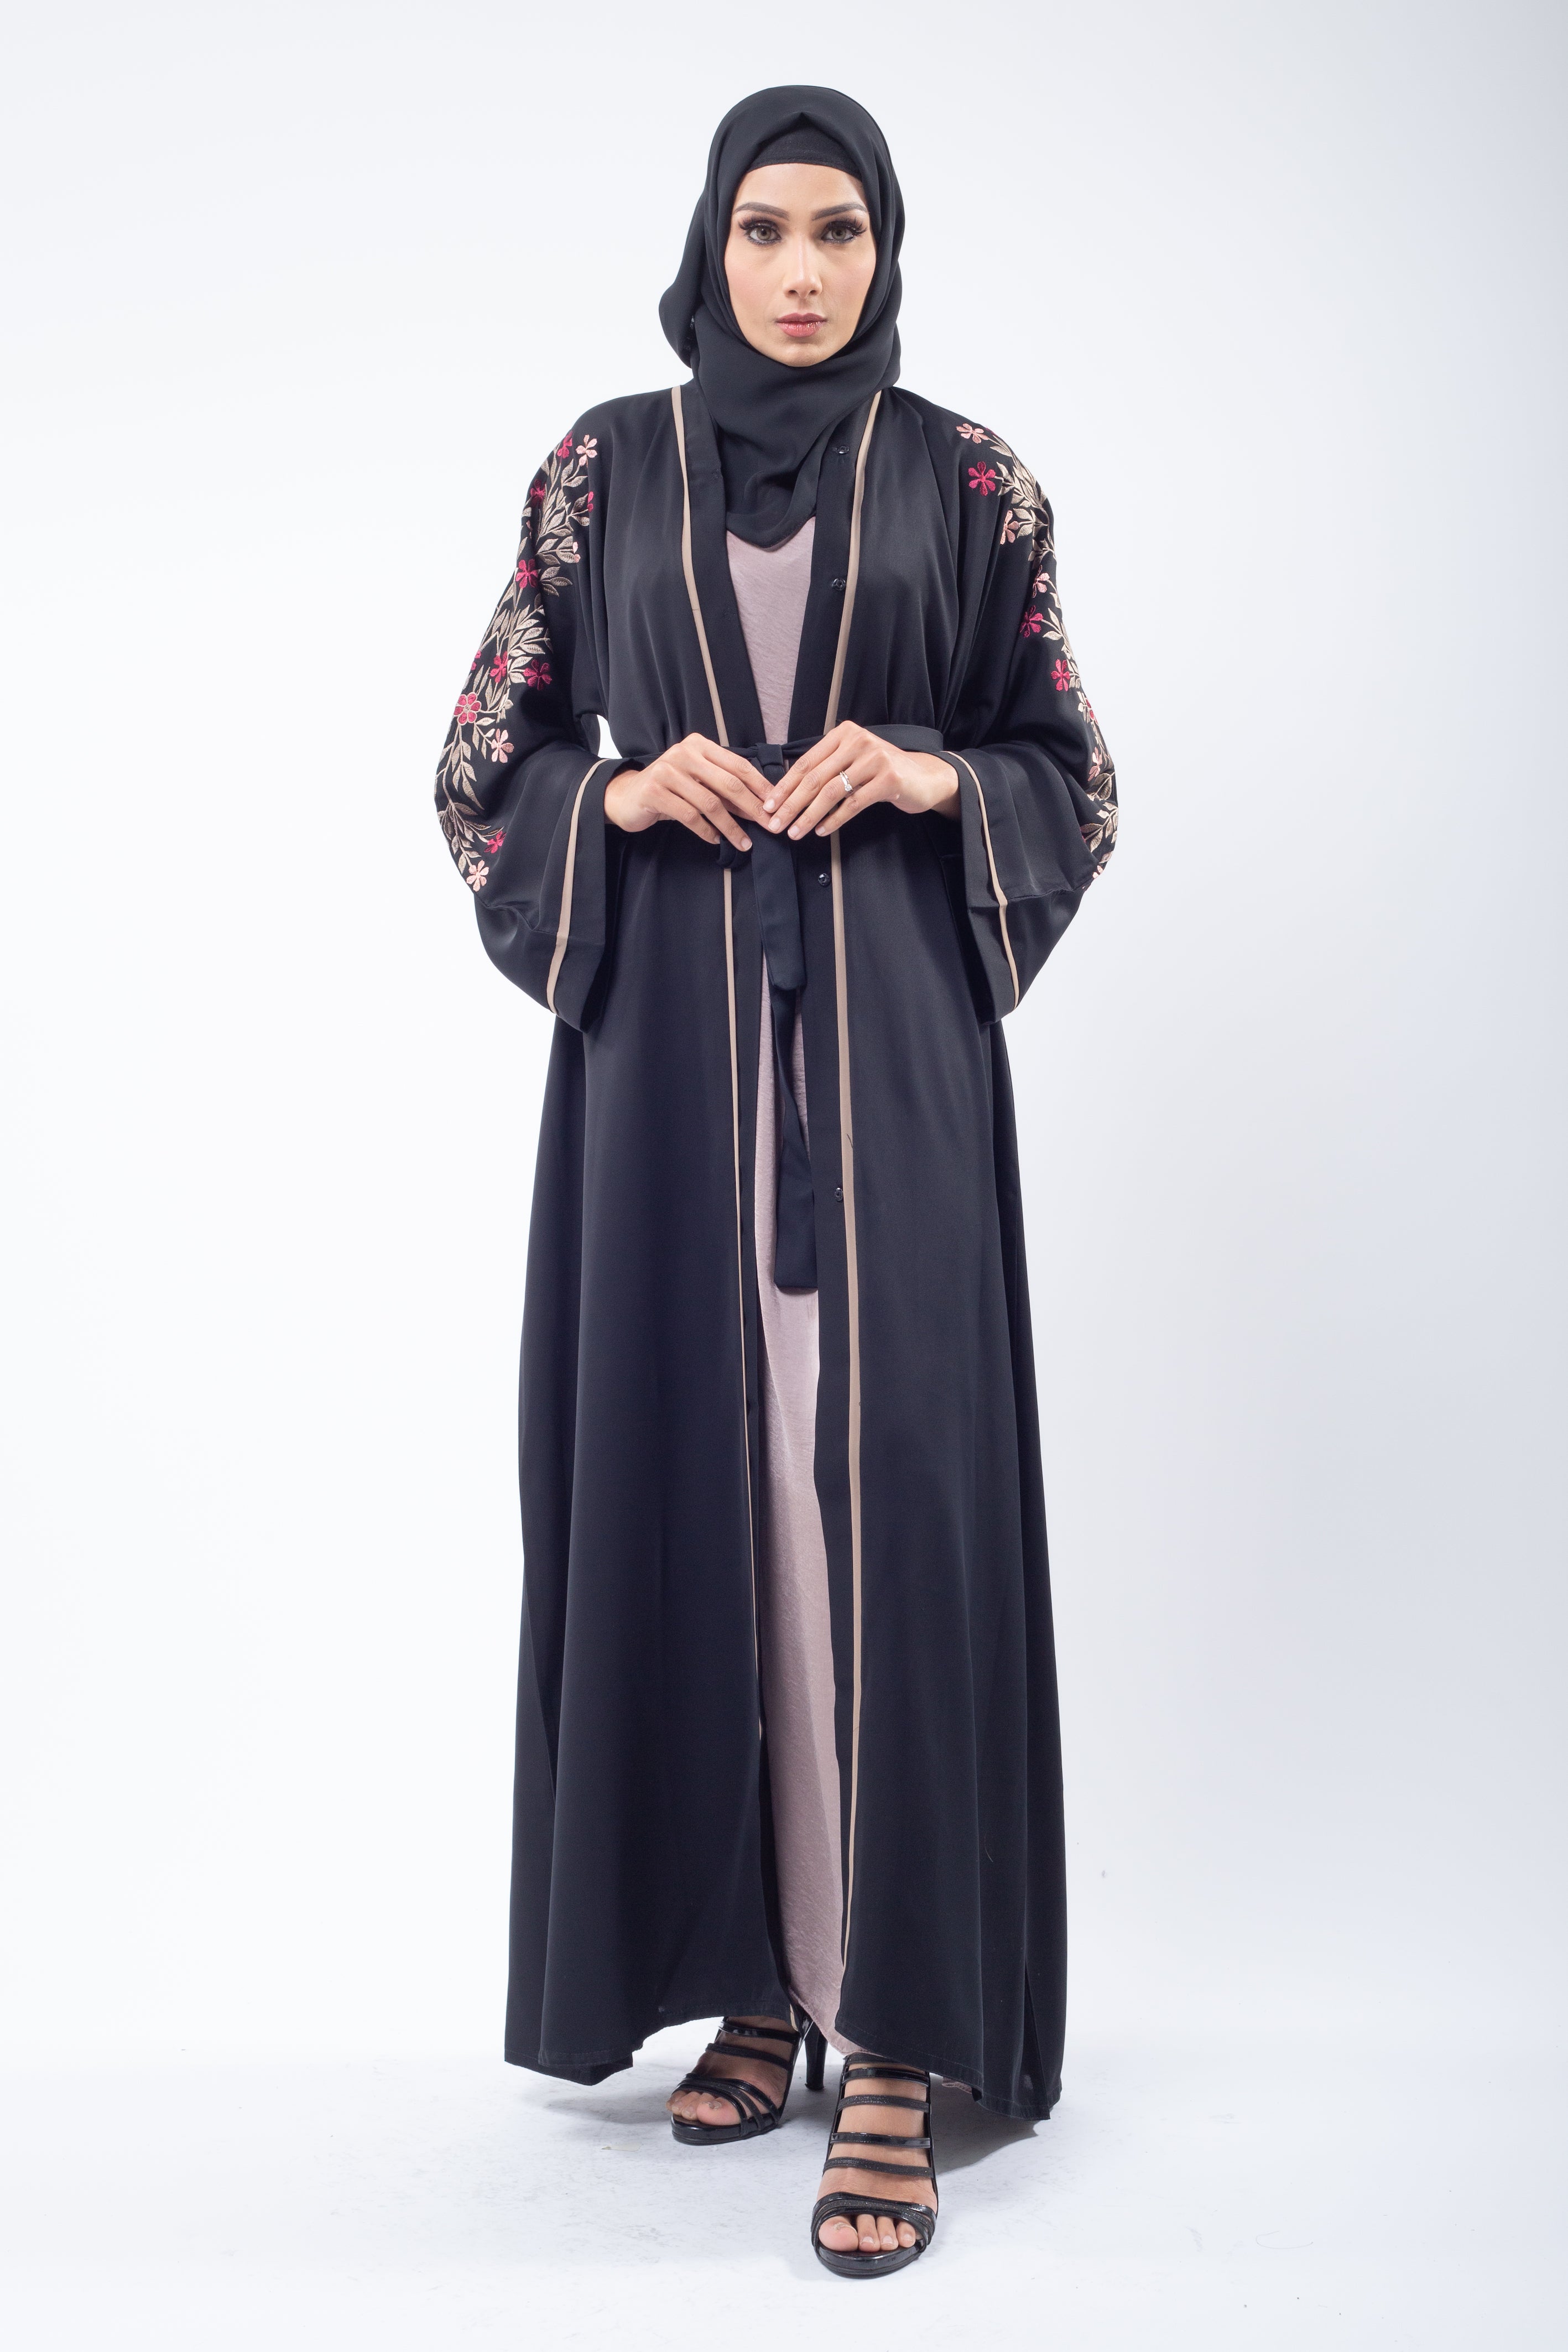 Blooming Floral Embroidery Black Open Abaya